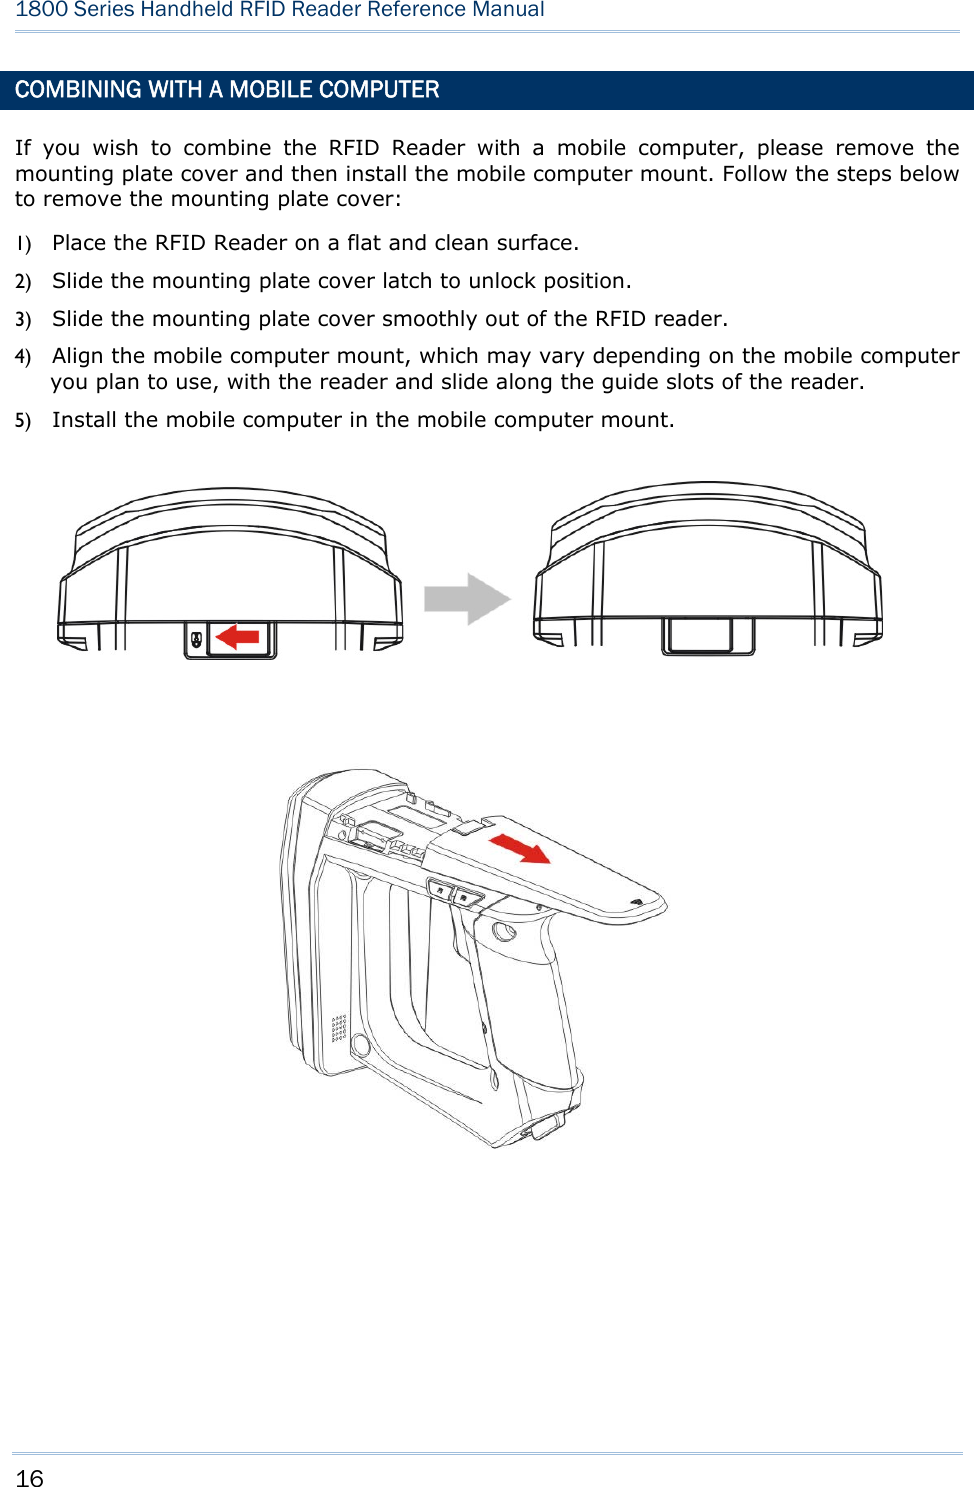 16  1800 Series Handheld RFID Reader Reference Manual  COMBINING WITH A MOBILE COMPUTER If you wish to combine the RFID Reader with a mobile computer, please remove the mounting plate cover and then install the mobile computer mount. Follow the steps below to remove the mounting plate cover: 1) Place the RFID Reader on a flat and clean surface. 2) Slide the mounting plate cover latch to unlock position. 3) Slide the mounting plate cover smoothly out of the RFID reader. 4) Align the mobile computer mount, which may vary depending on the mobile computer you plan to use, with the reader and slide along the guide slots of the reader. 5) Install the mobile computer in the mobile computer mount.                                         